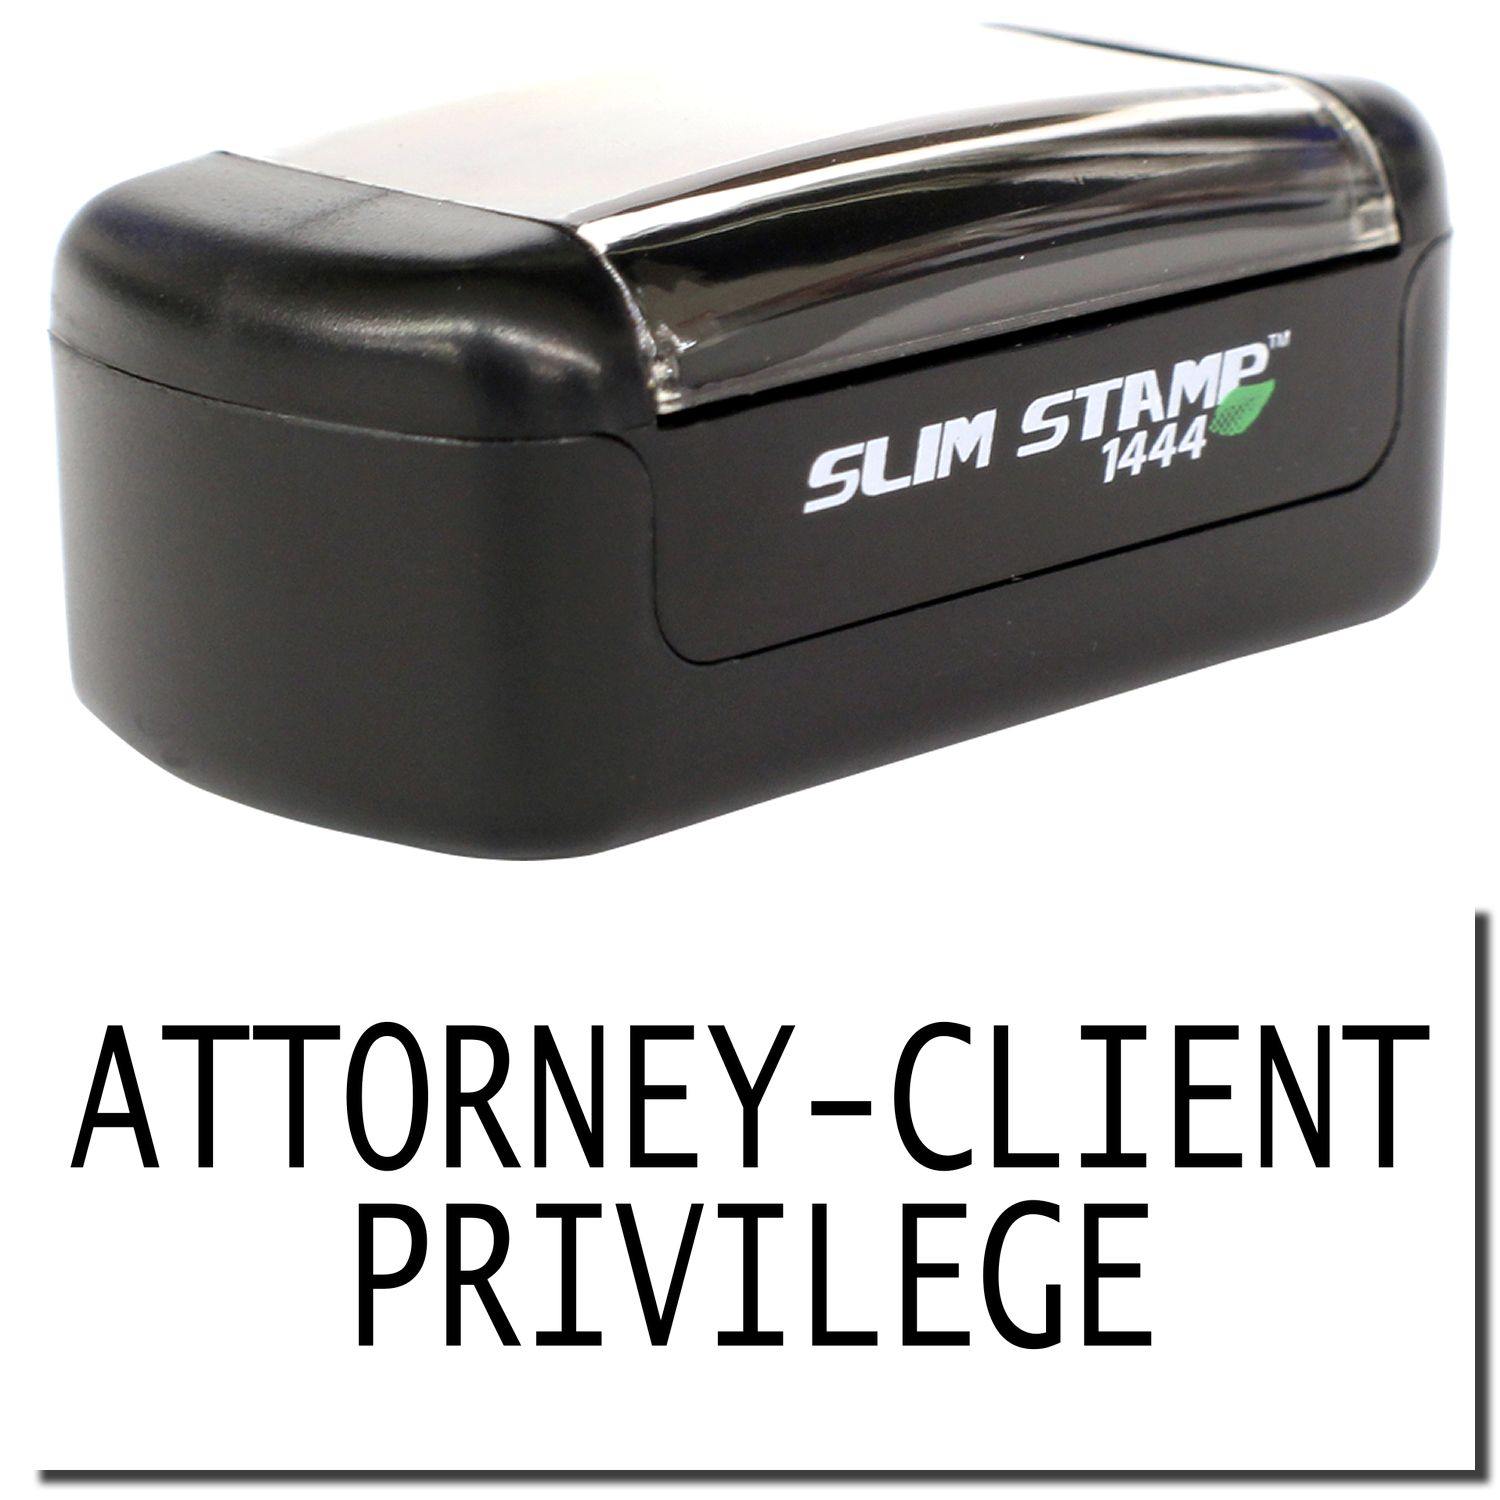 A stock office pre-inked stamp with a stamped image showing how the text "ATTORNEY-CLIENT PRIVILEGE" in a Times font is displayed after stamping.